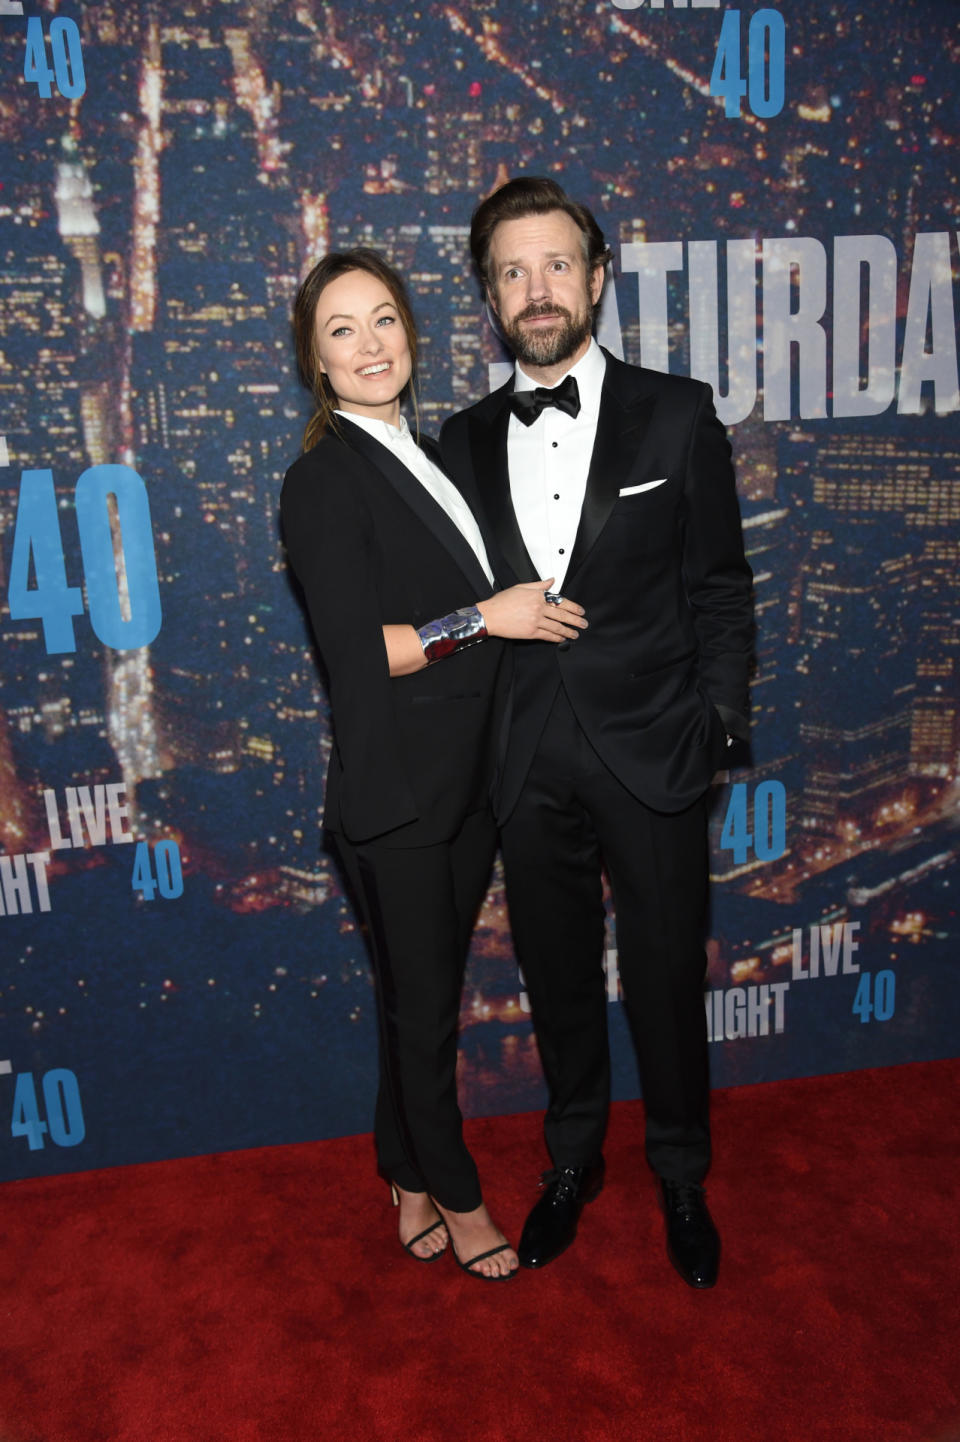 Olivia Wilde, wearing an H&M Conscious Commerce Collection suit, matches her husband, Jason Sudeikis. The couple that dresses together, stays together…